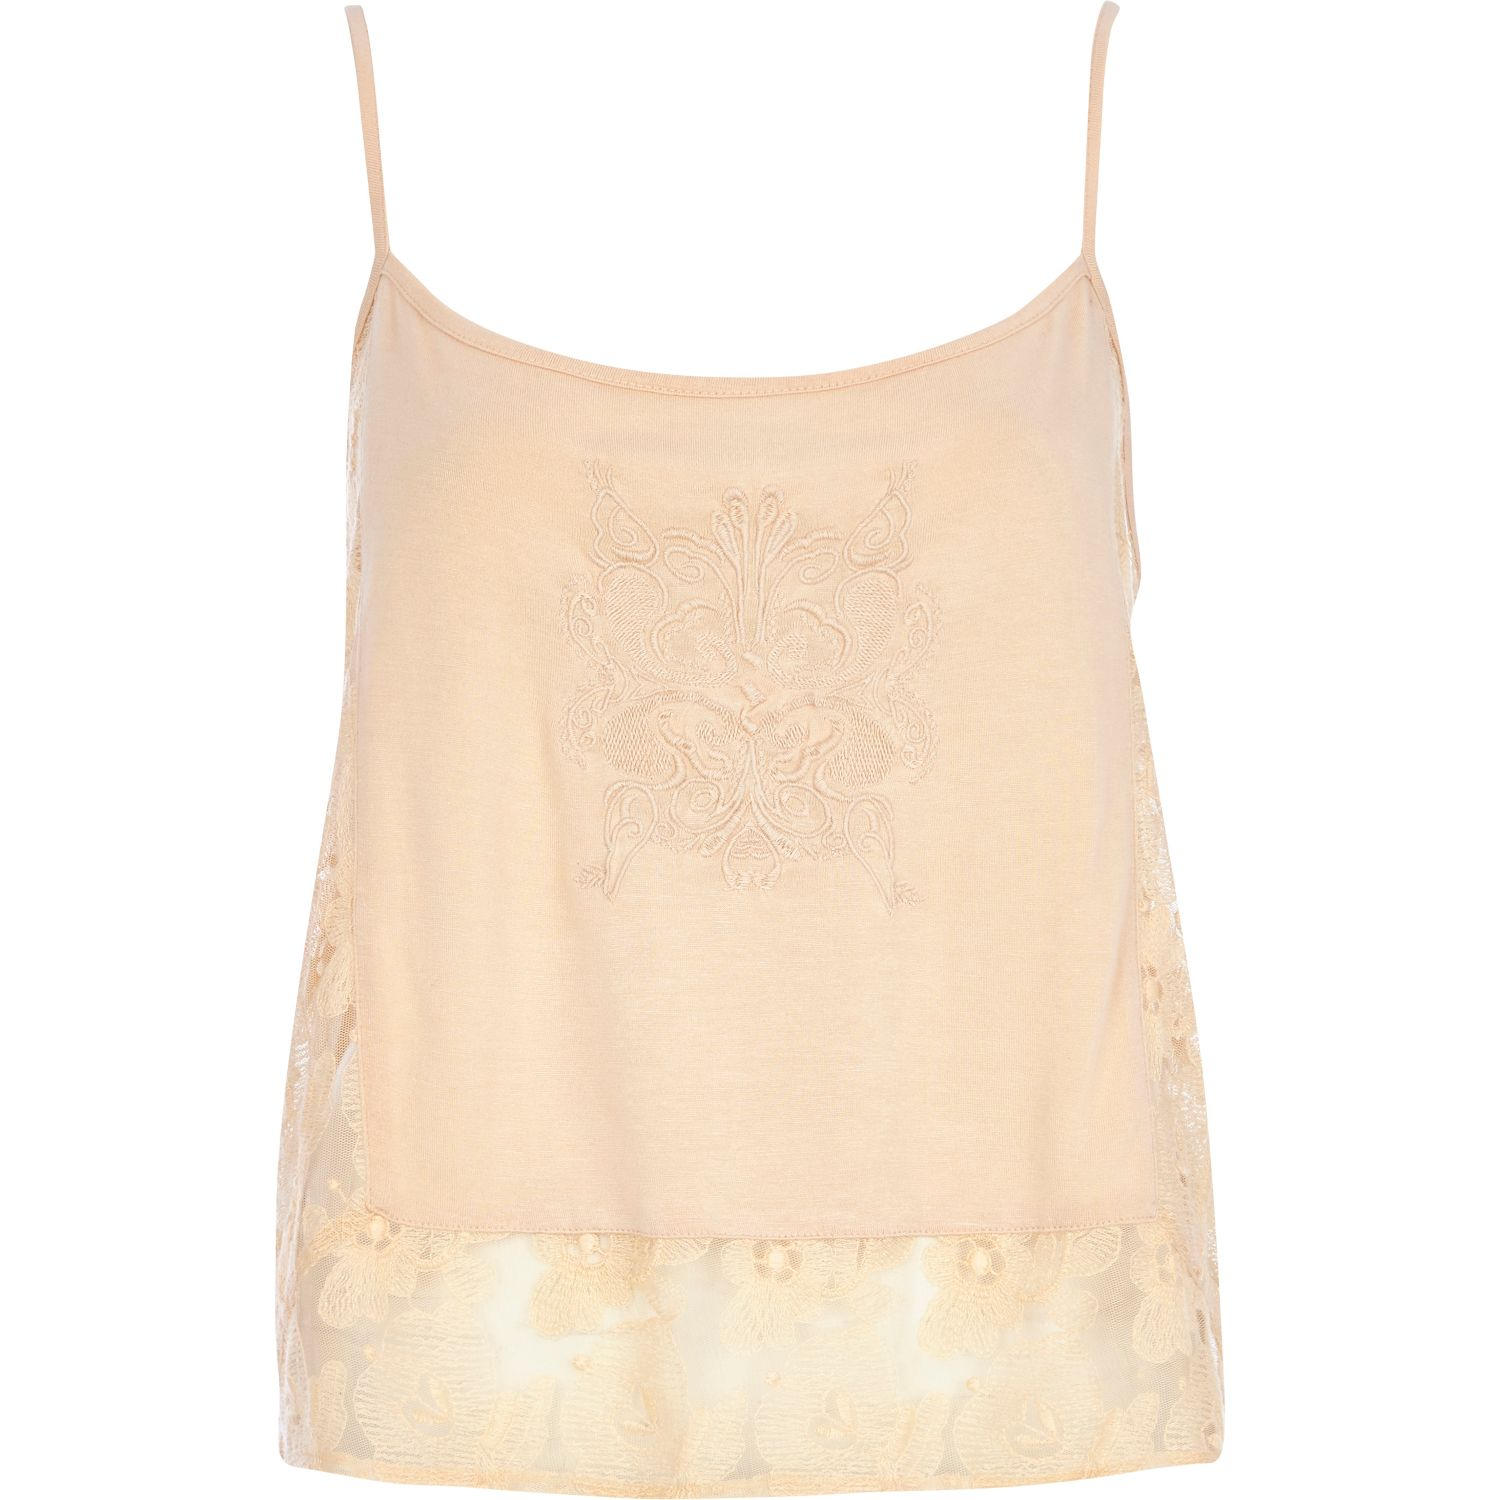 River island Light Pink Lace Embroidered Cami Top in Pink | Lyst